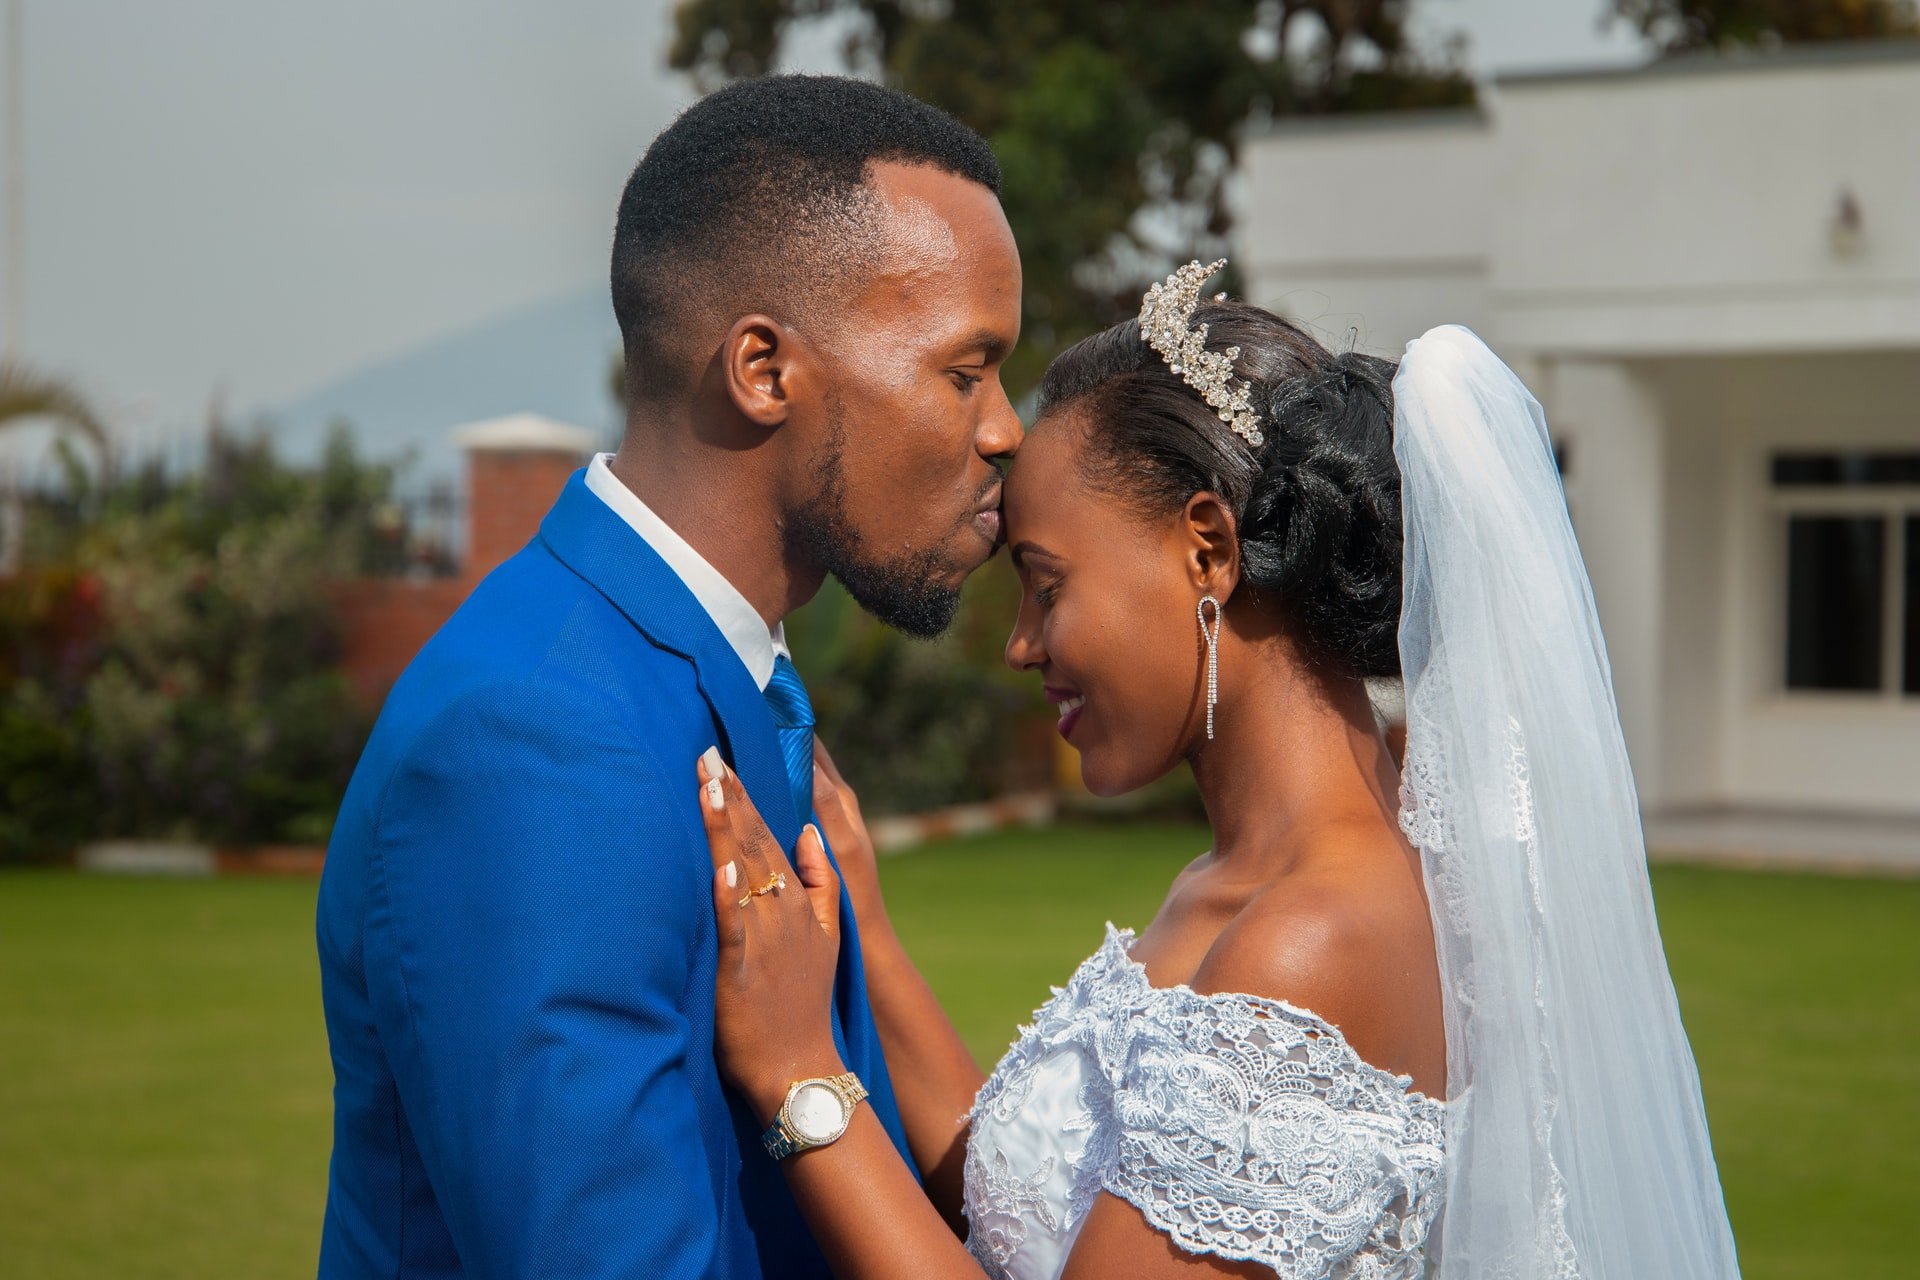 A black couple on their wedding day; the man is kissing the woman's forehead